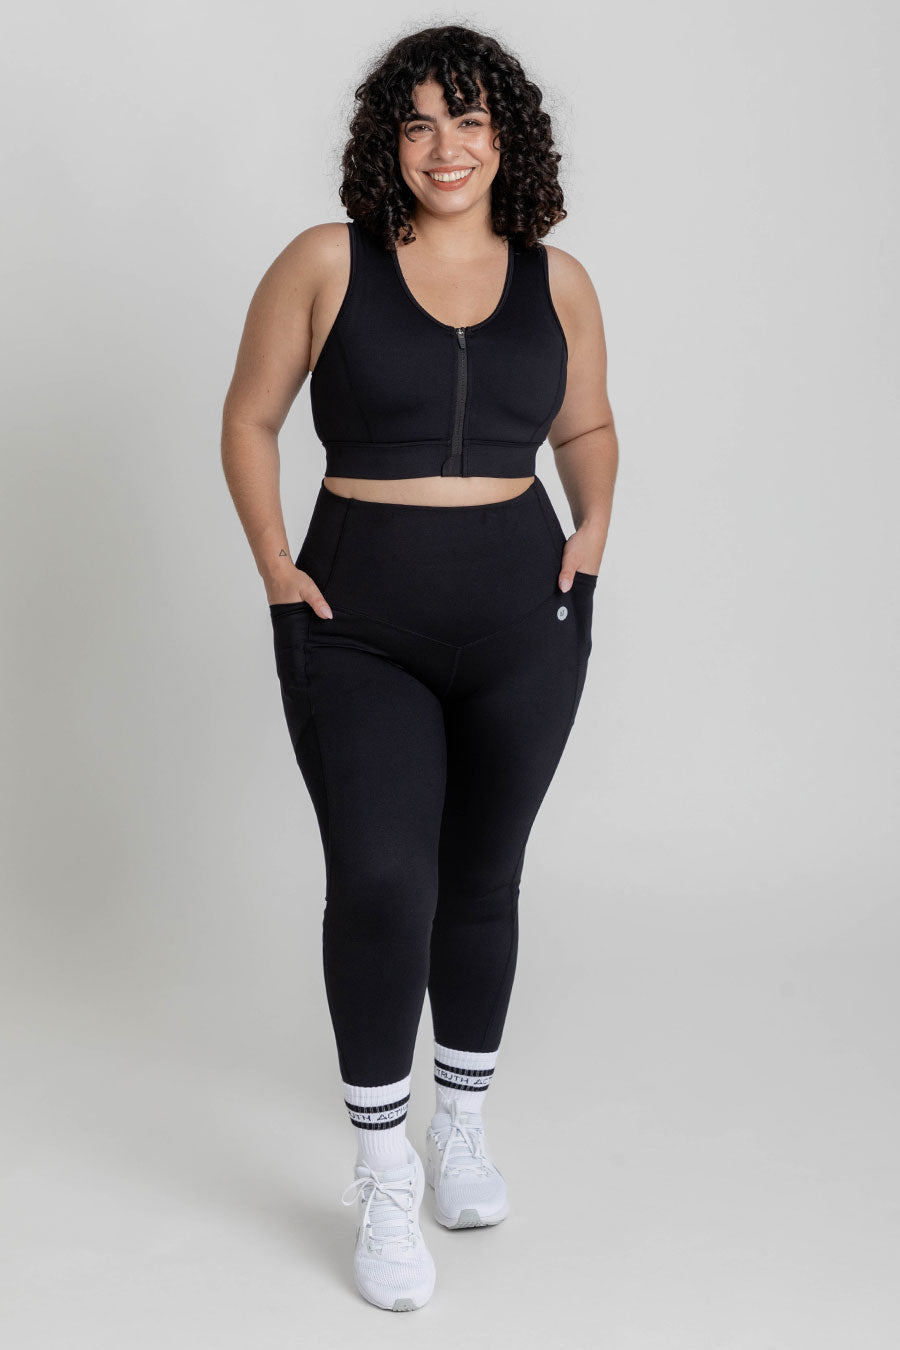 Core Pocket Full Length Tight - Black from Active Truth™
